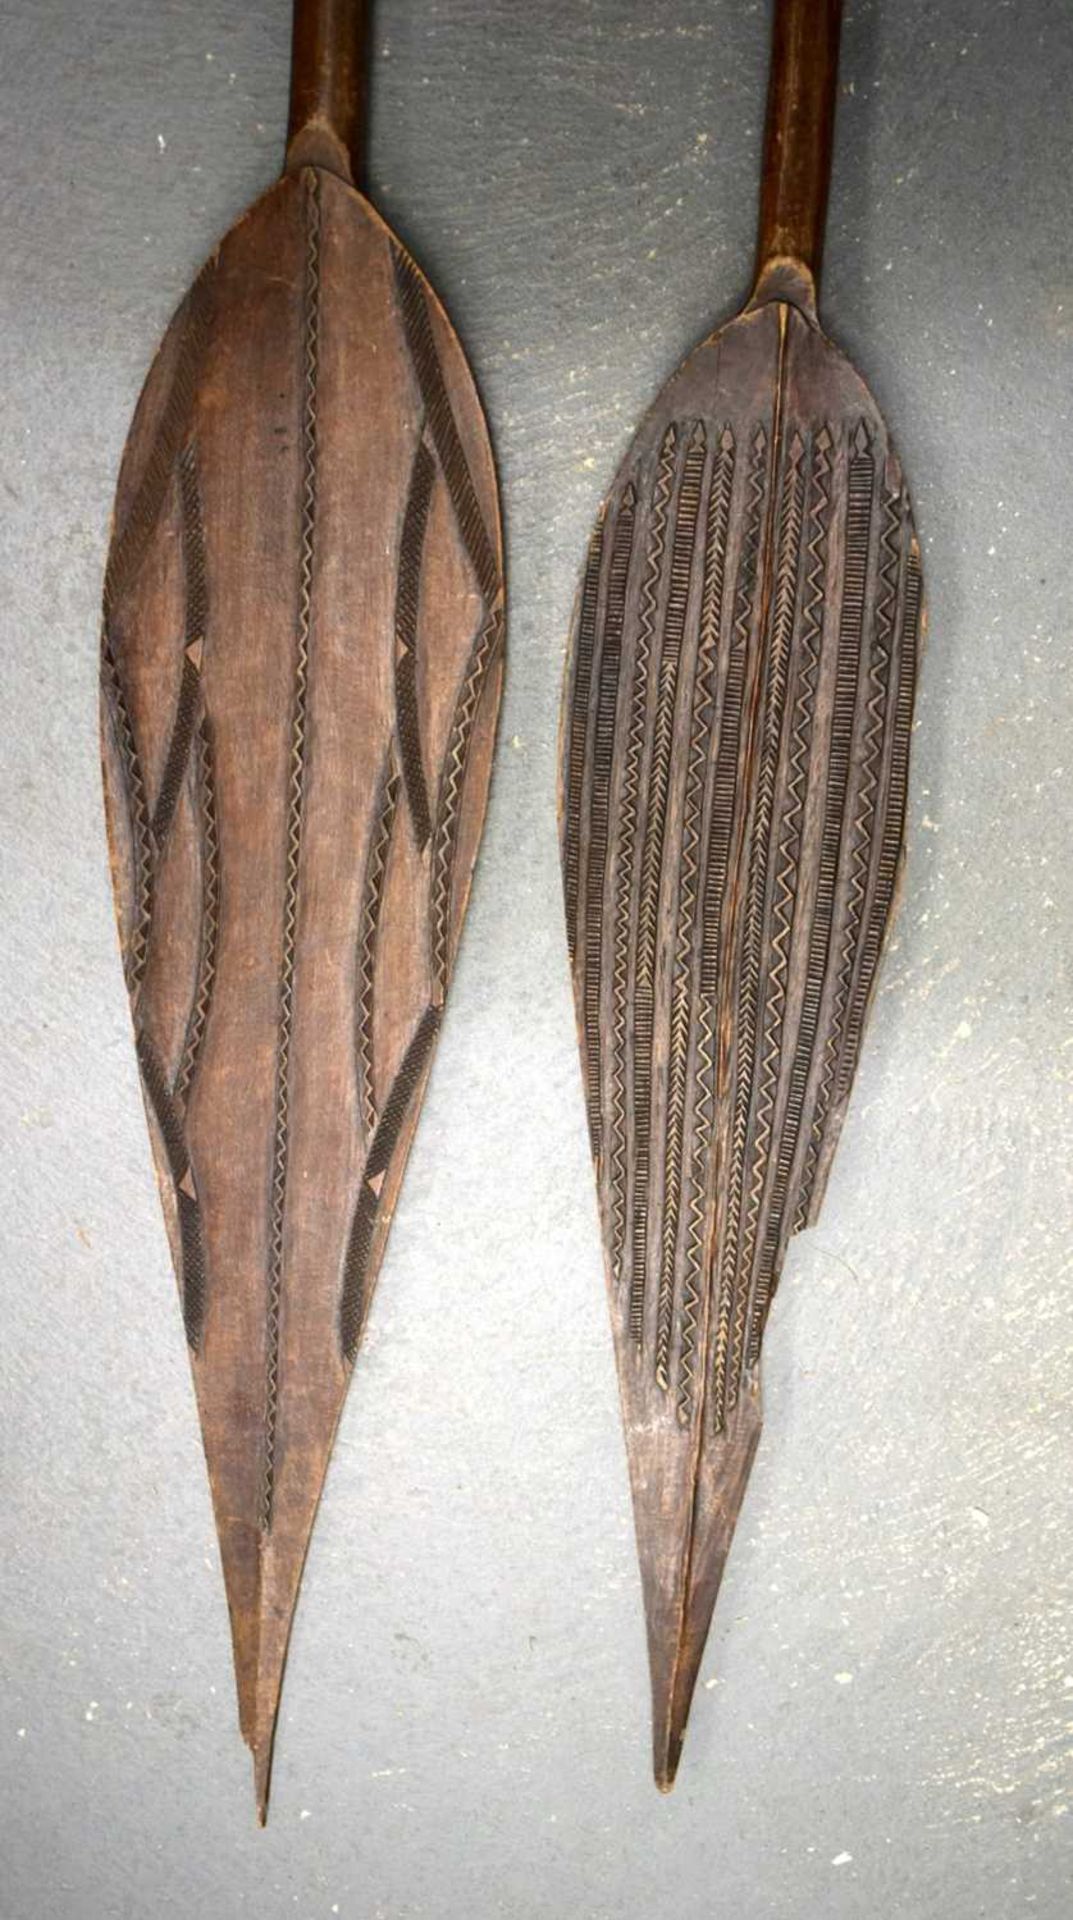 TWO AFRICAN TRIBAL CARVED WOOD PADDLES one decorated with animals, the other with motifs. 160 cm - Image 12 of 13